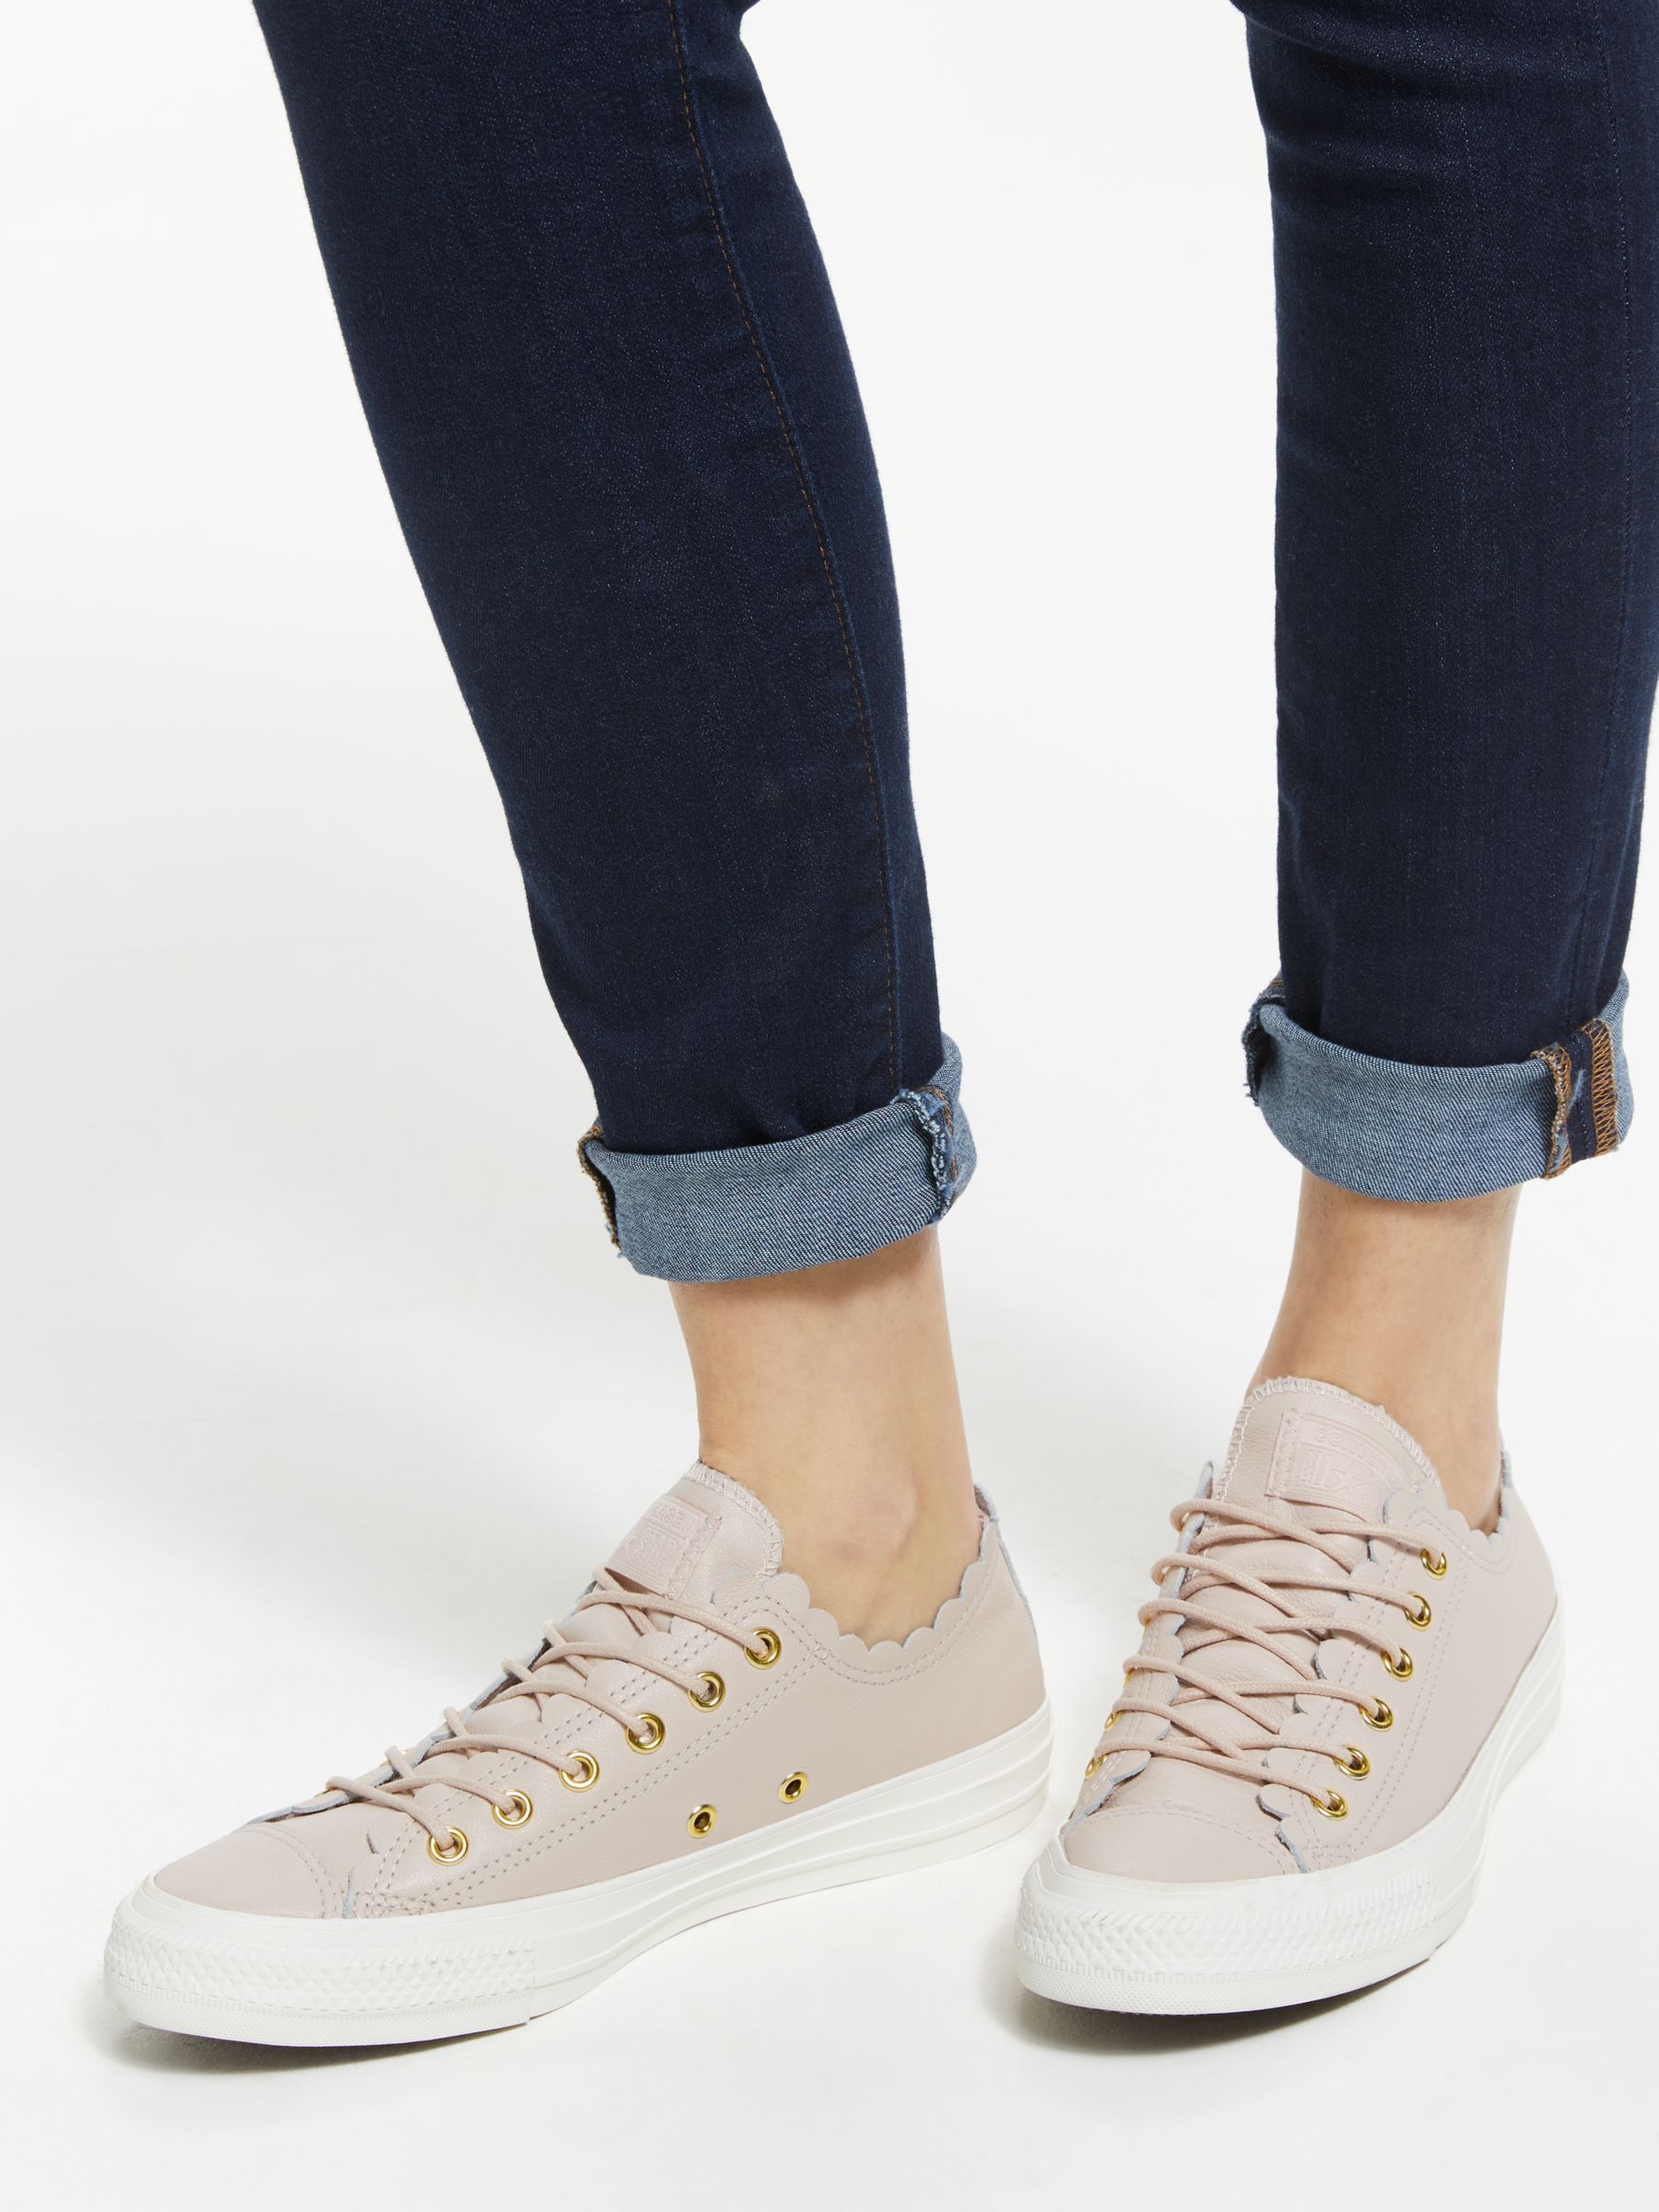 converse scallop low top